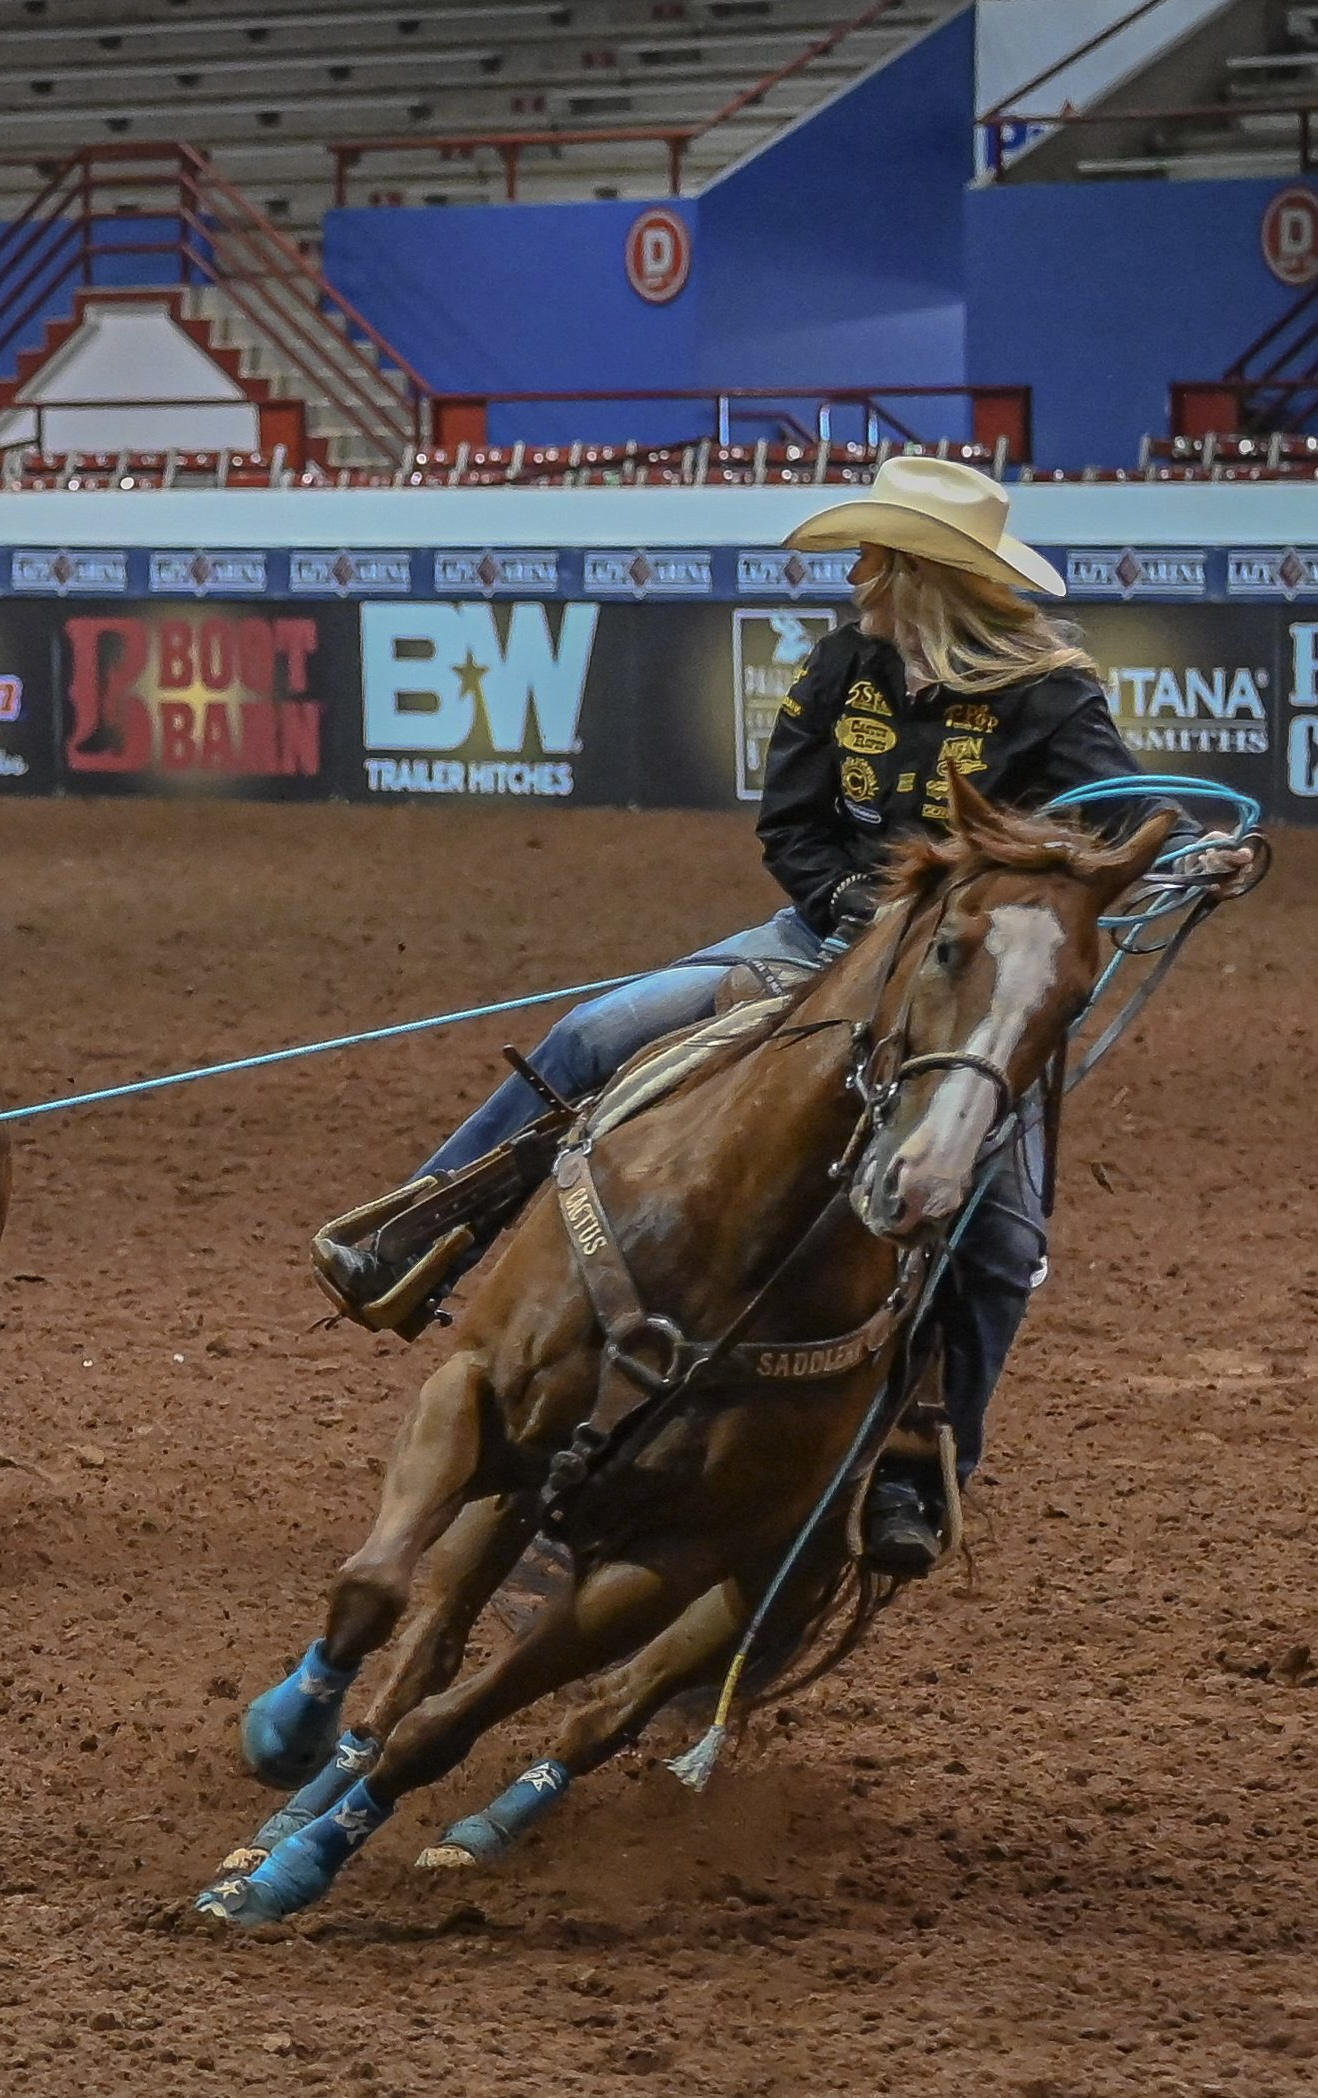 2021 Cowtown Christmas Championship Rodeo - World Champions Rodeo Alliance